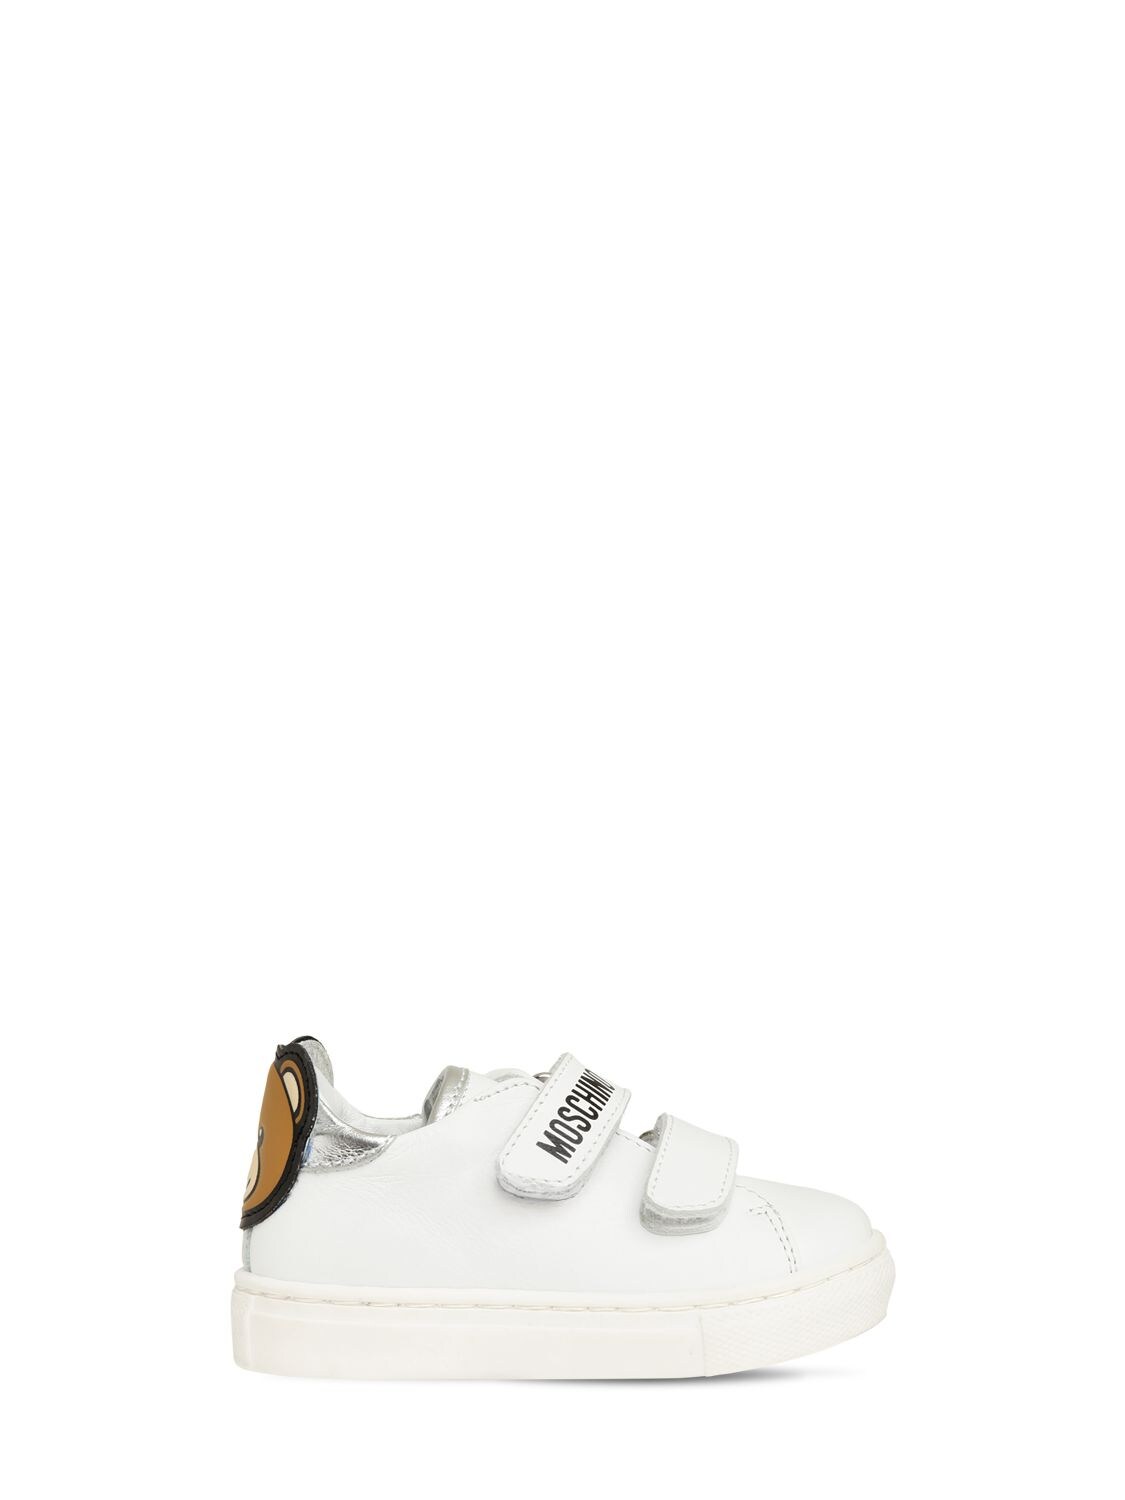 Moschino Kids' Leather Strap Sneakers W/ Patch In White,silver